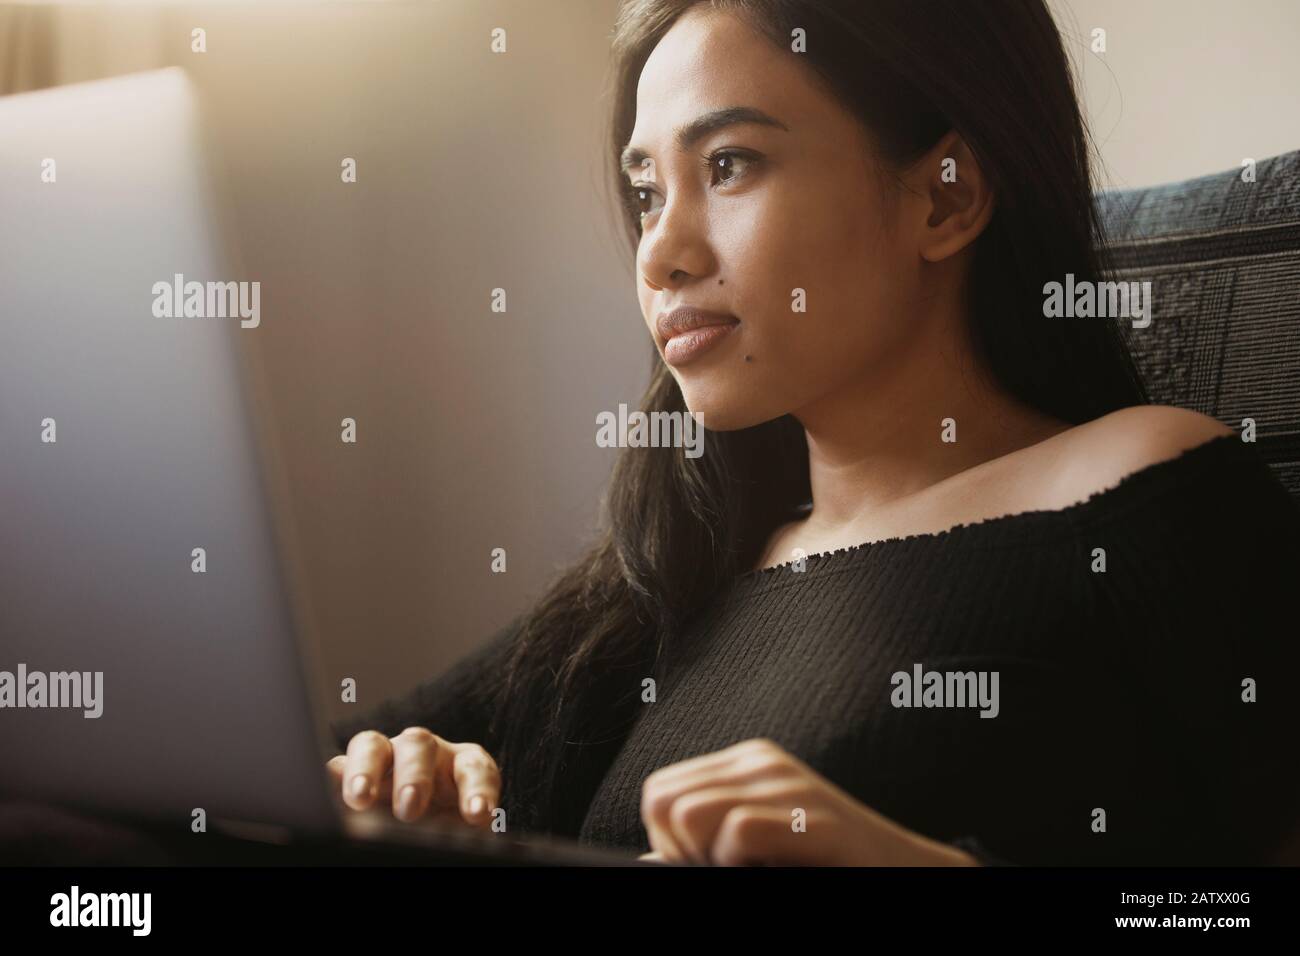 Beautiful young woman remotely working on a laptop computer at home. Stock Photo